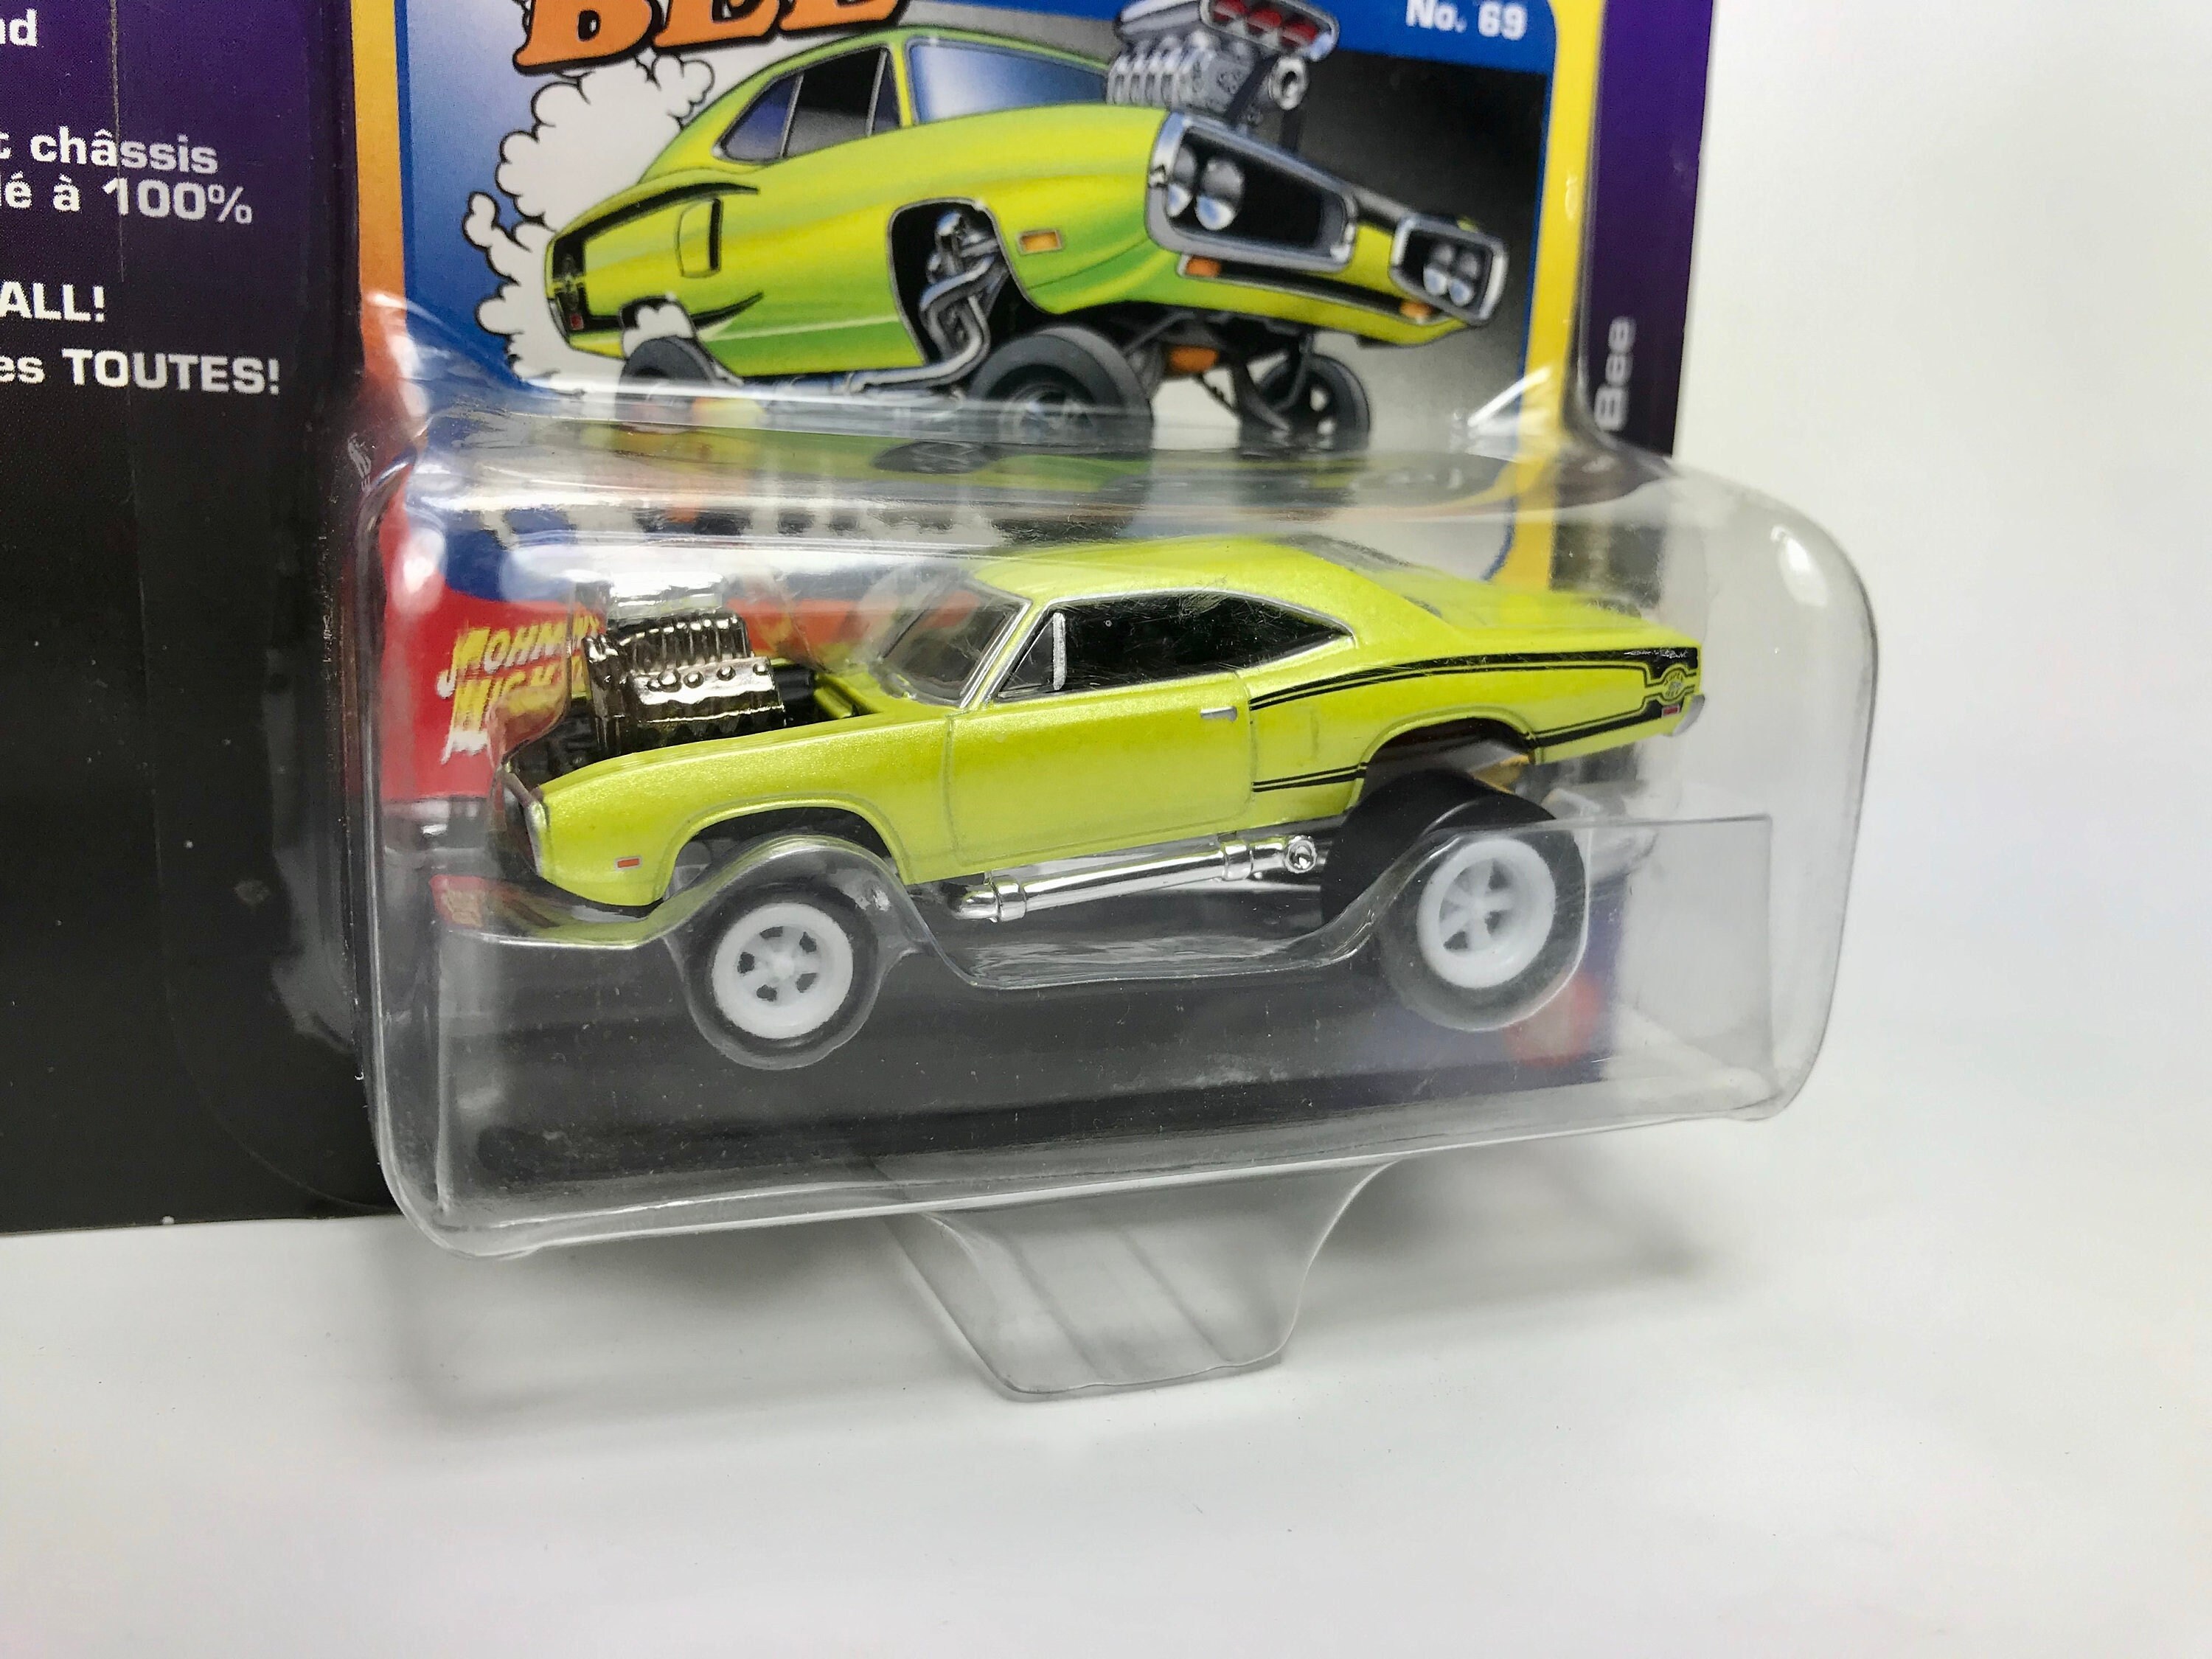 Die cast Collectible RARE 1/64 Scale White Lighting Chase Car '70 Dodge Super Bee Zinger